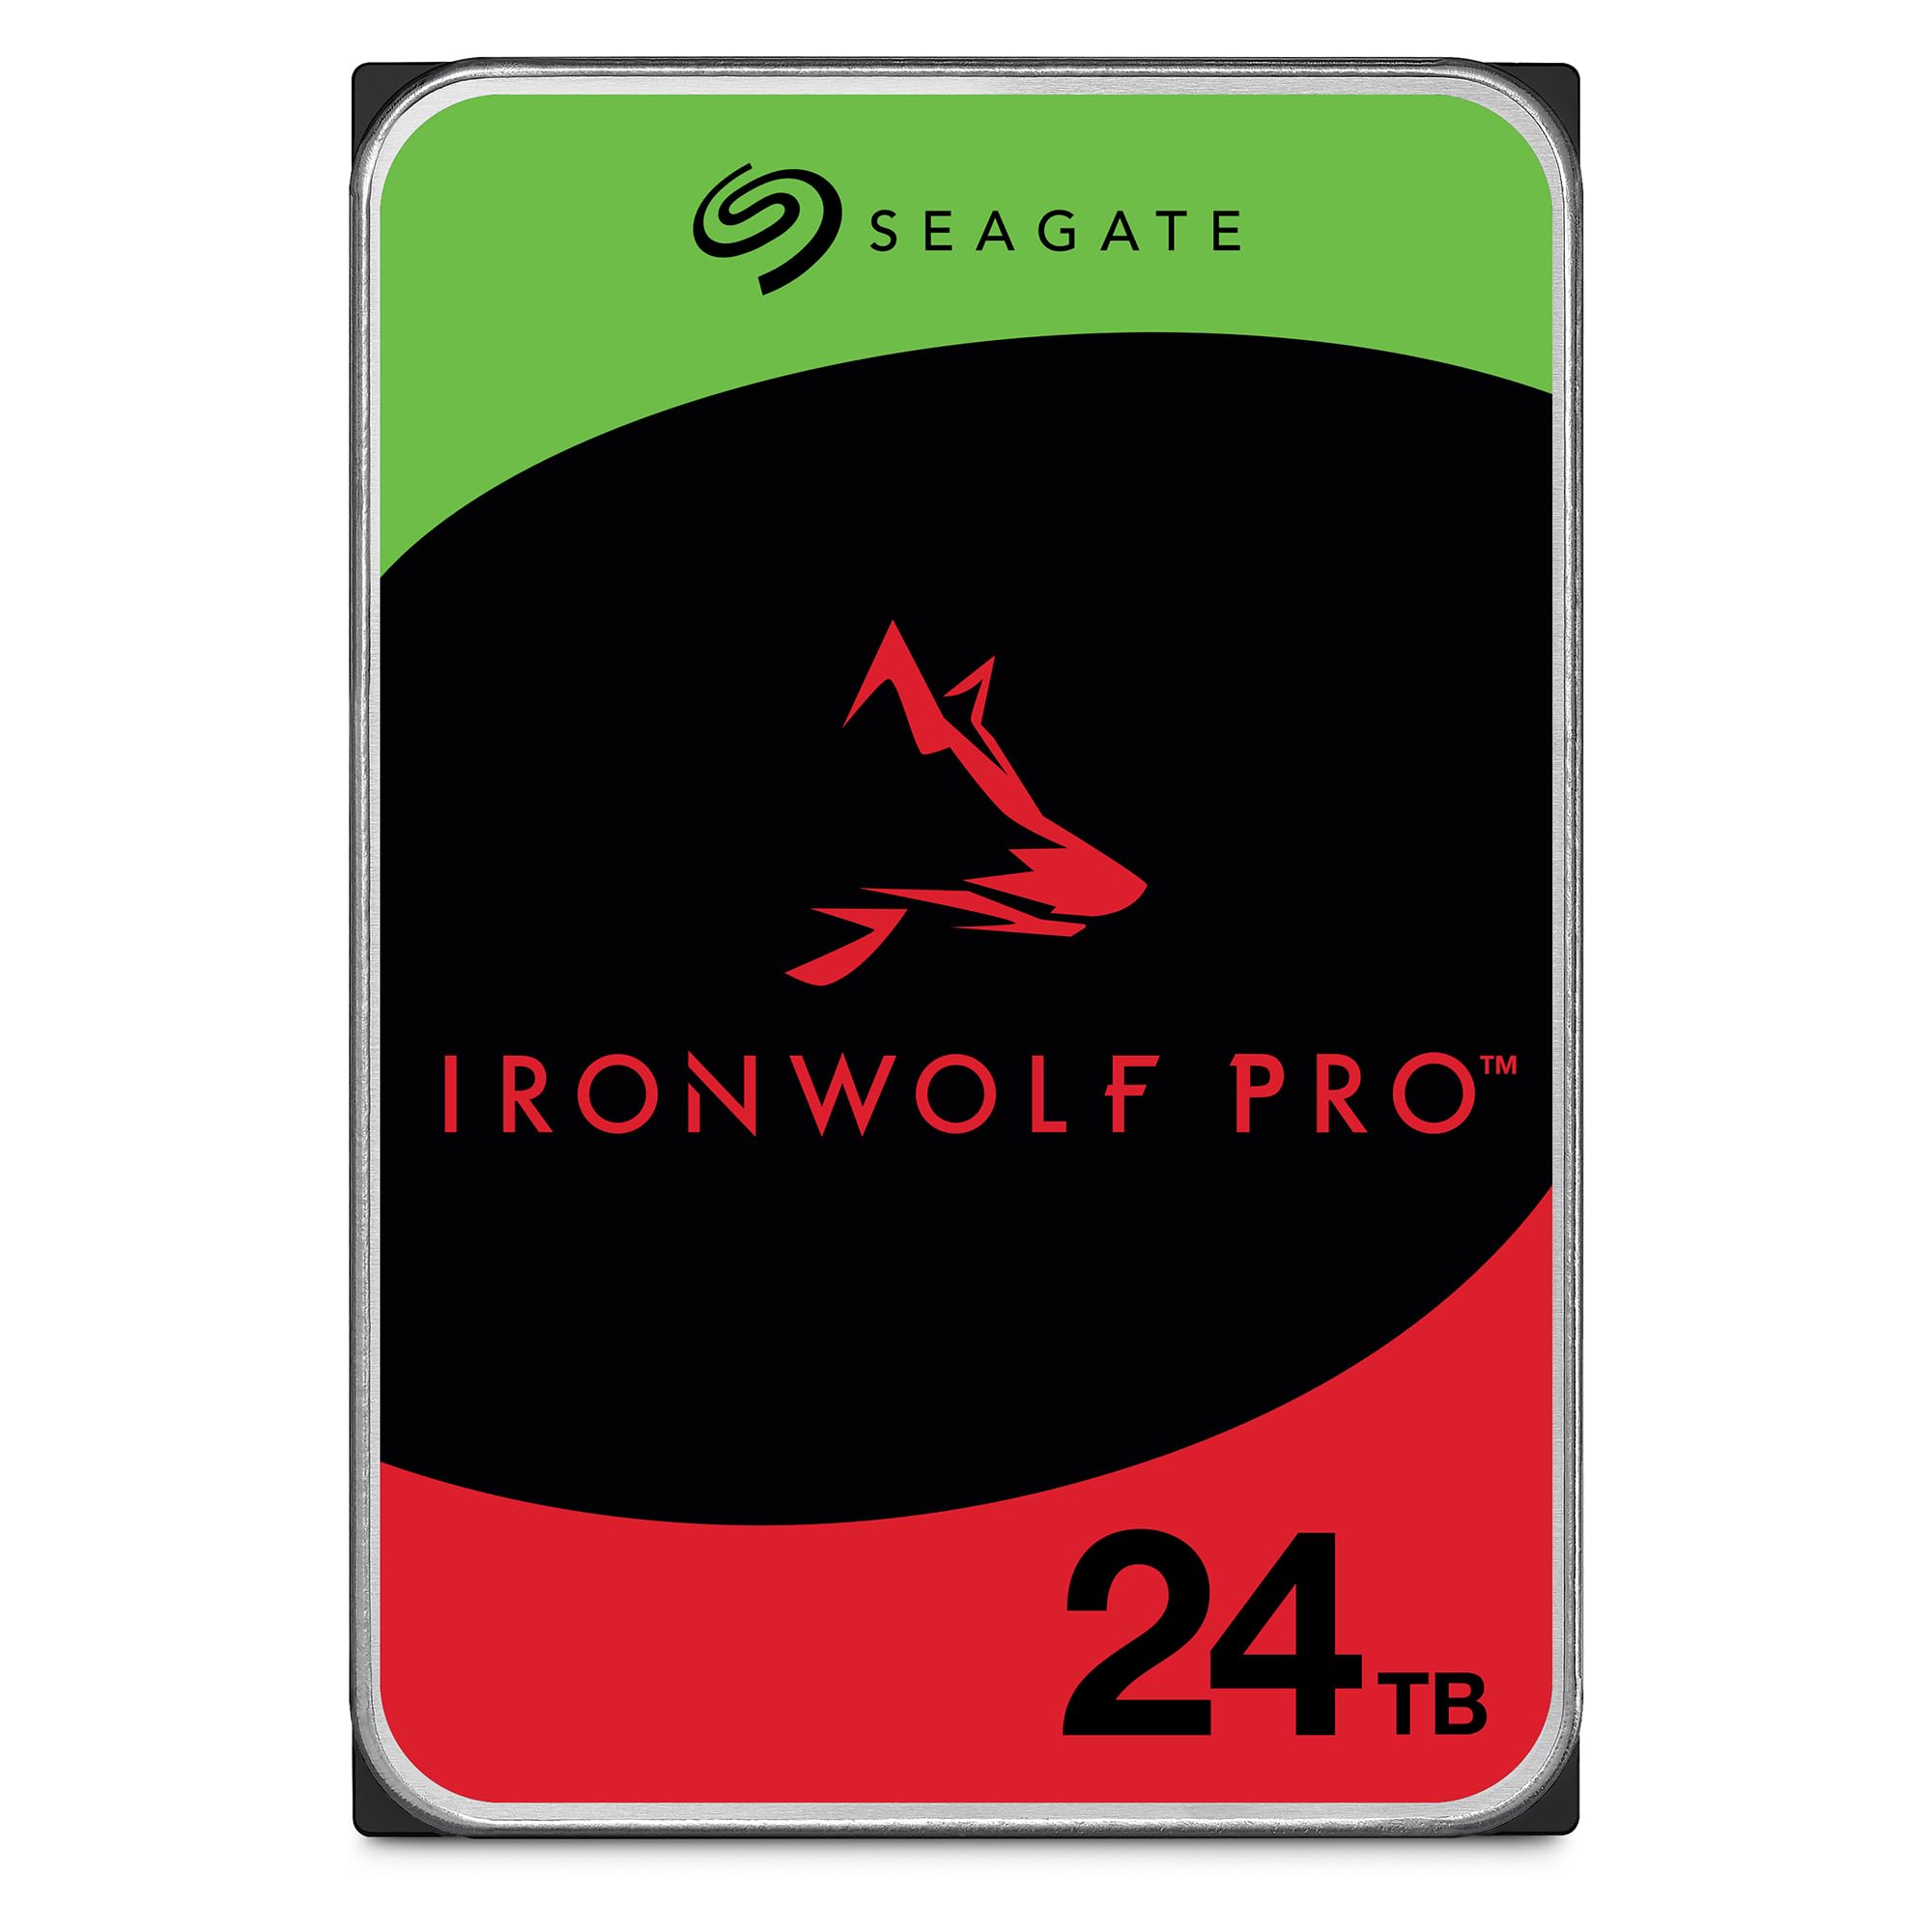 Seagate IronWolf Pro 24TB Enterprise NAS Internal HDD Hard Drive – CMR 3.5 Inch SATA 6Gb/s 7200 RPM 512MB Cache for RAID Network Attached Storage, Rescue Services (ST24000NT002)